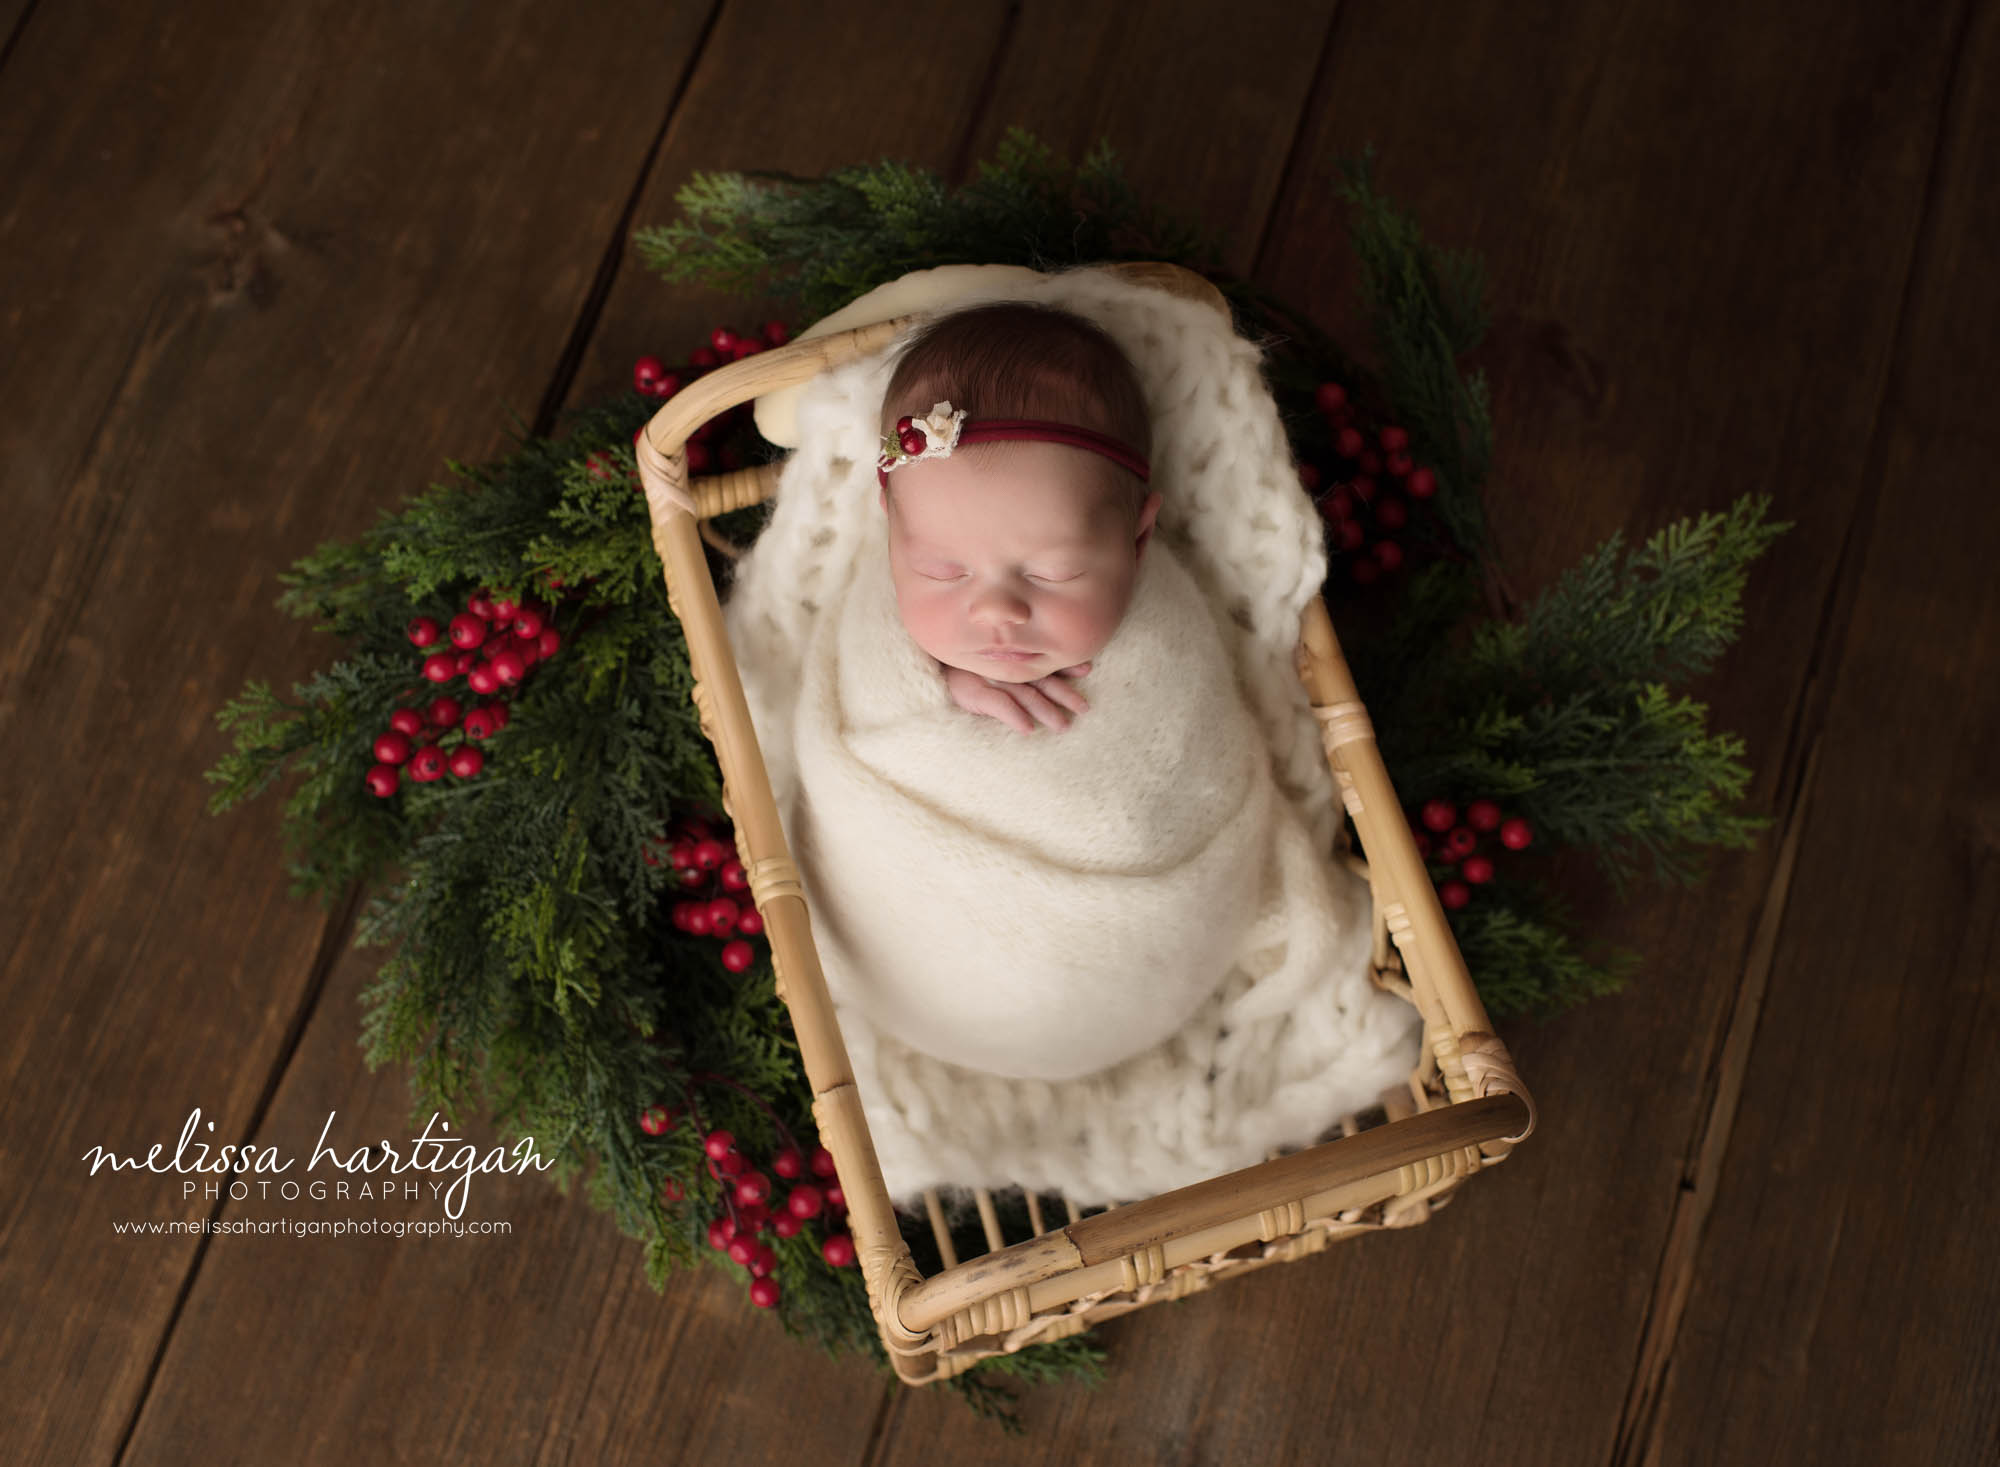 newborn baby girl wrapped in white wrap posed in basket wearing red headband